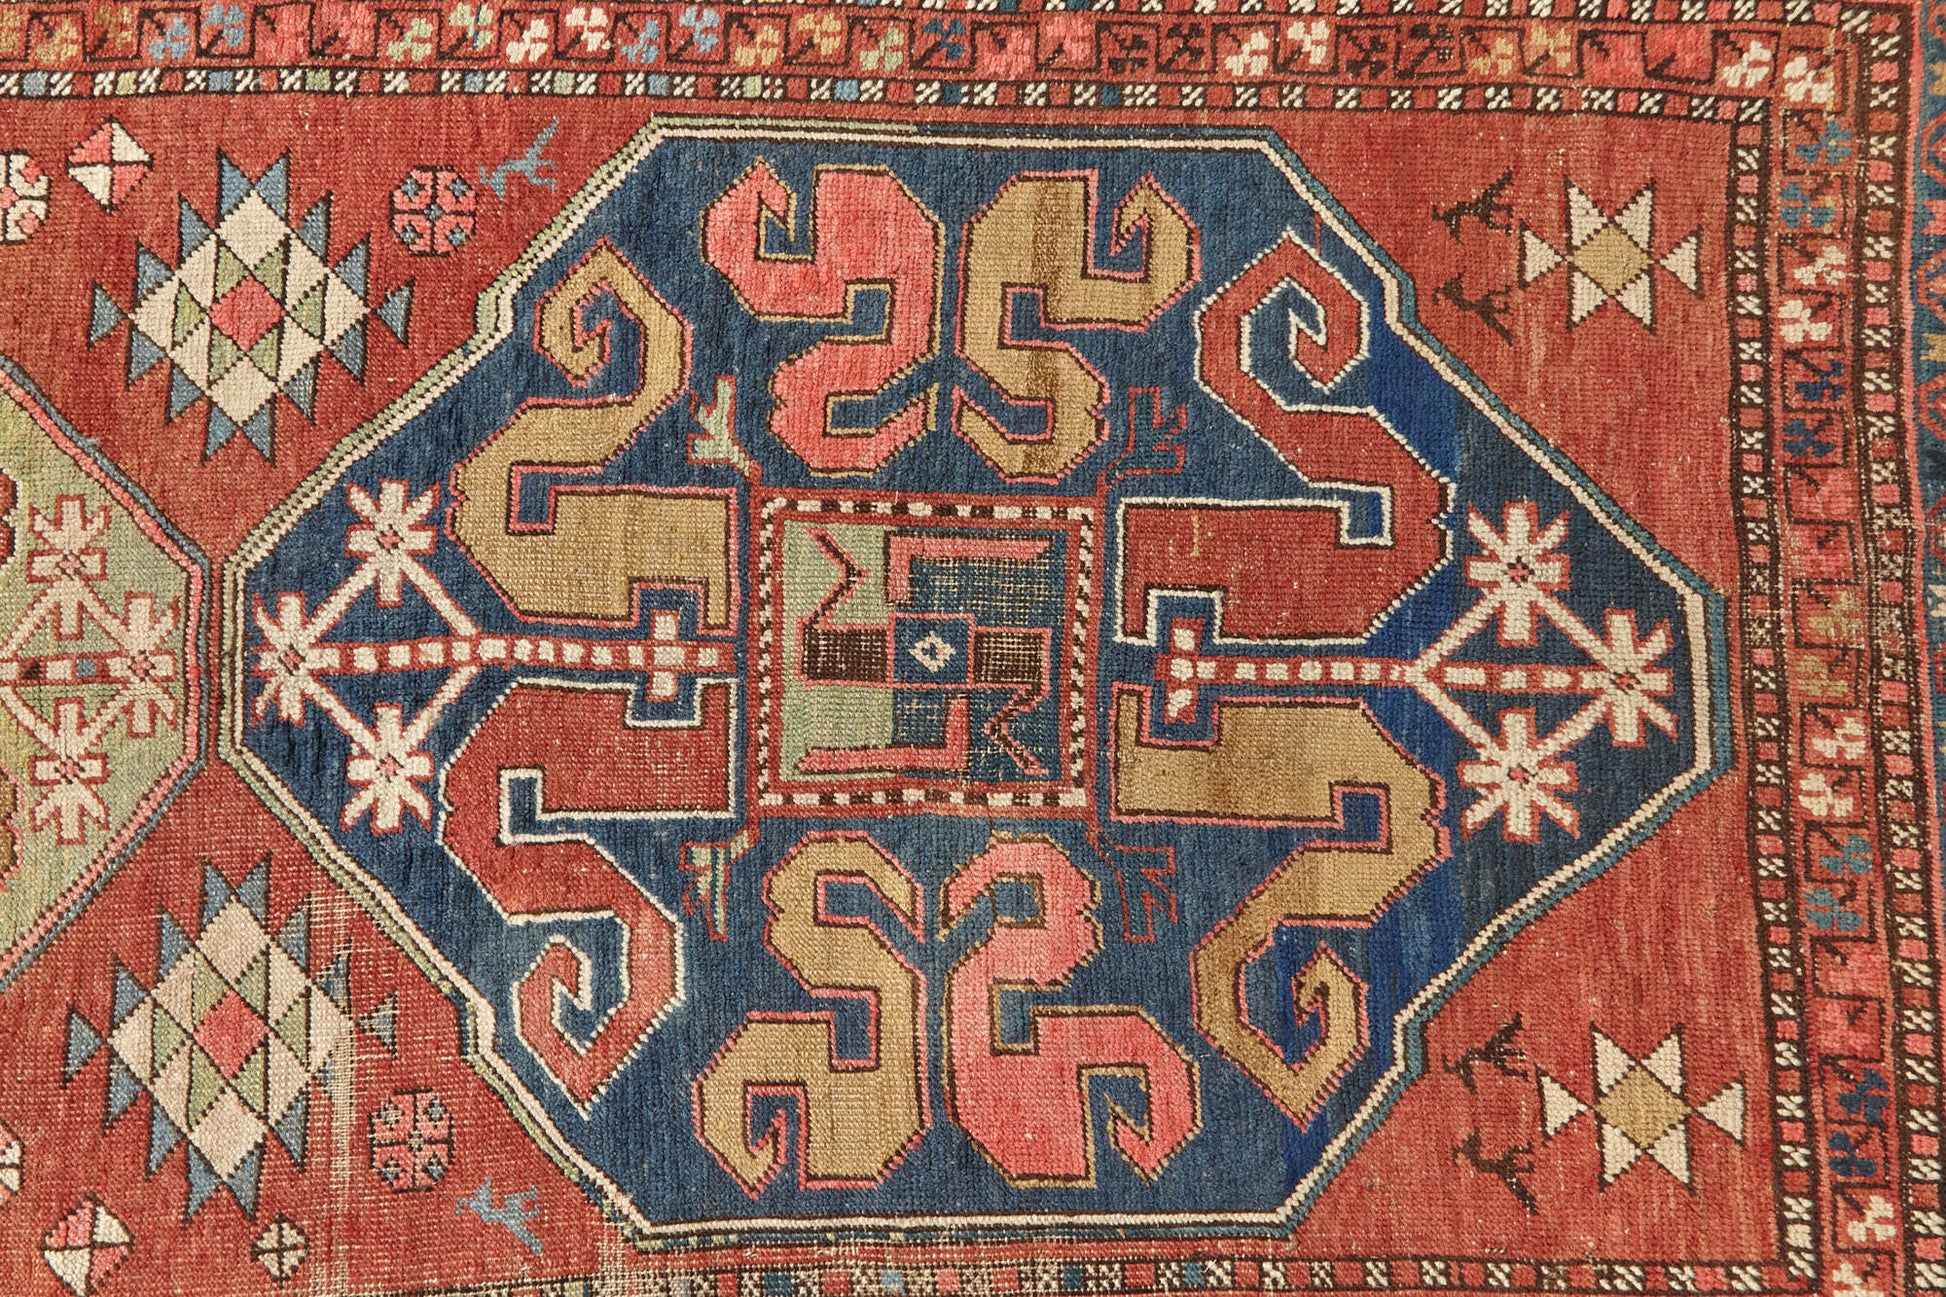 Kazak Cloudband antique Persian rug with rich pink base and two large medallion designs in the center, one pale green, one blue with pink, red, gold, cream and blue designs intricately hand woven throughout. A beautiful piece for a bedroom, hallway, dining room or study - Available from King Kennedy Rugs Los Angeles